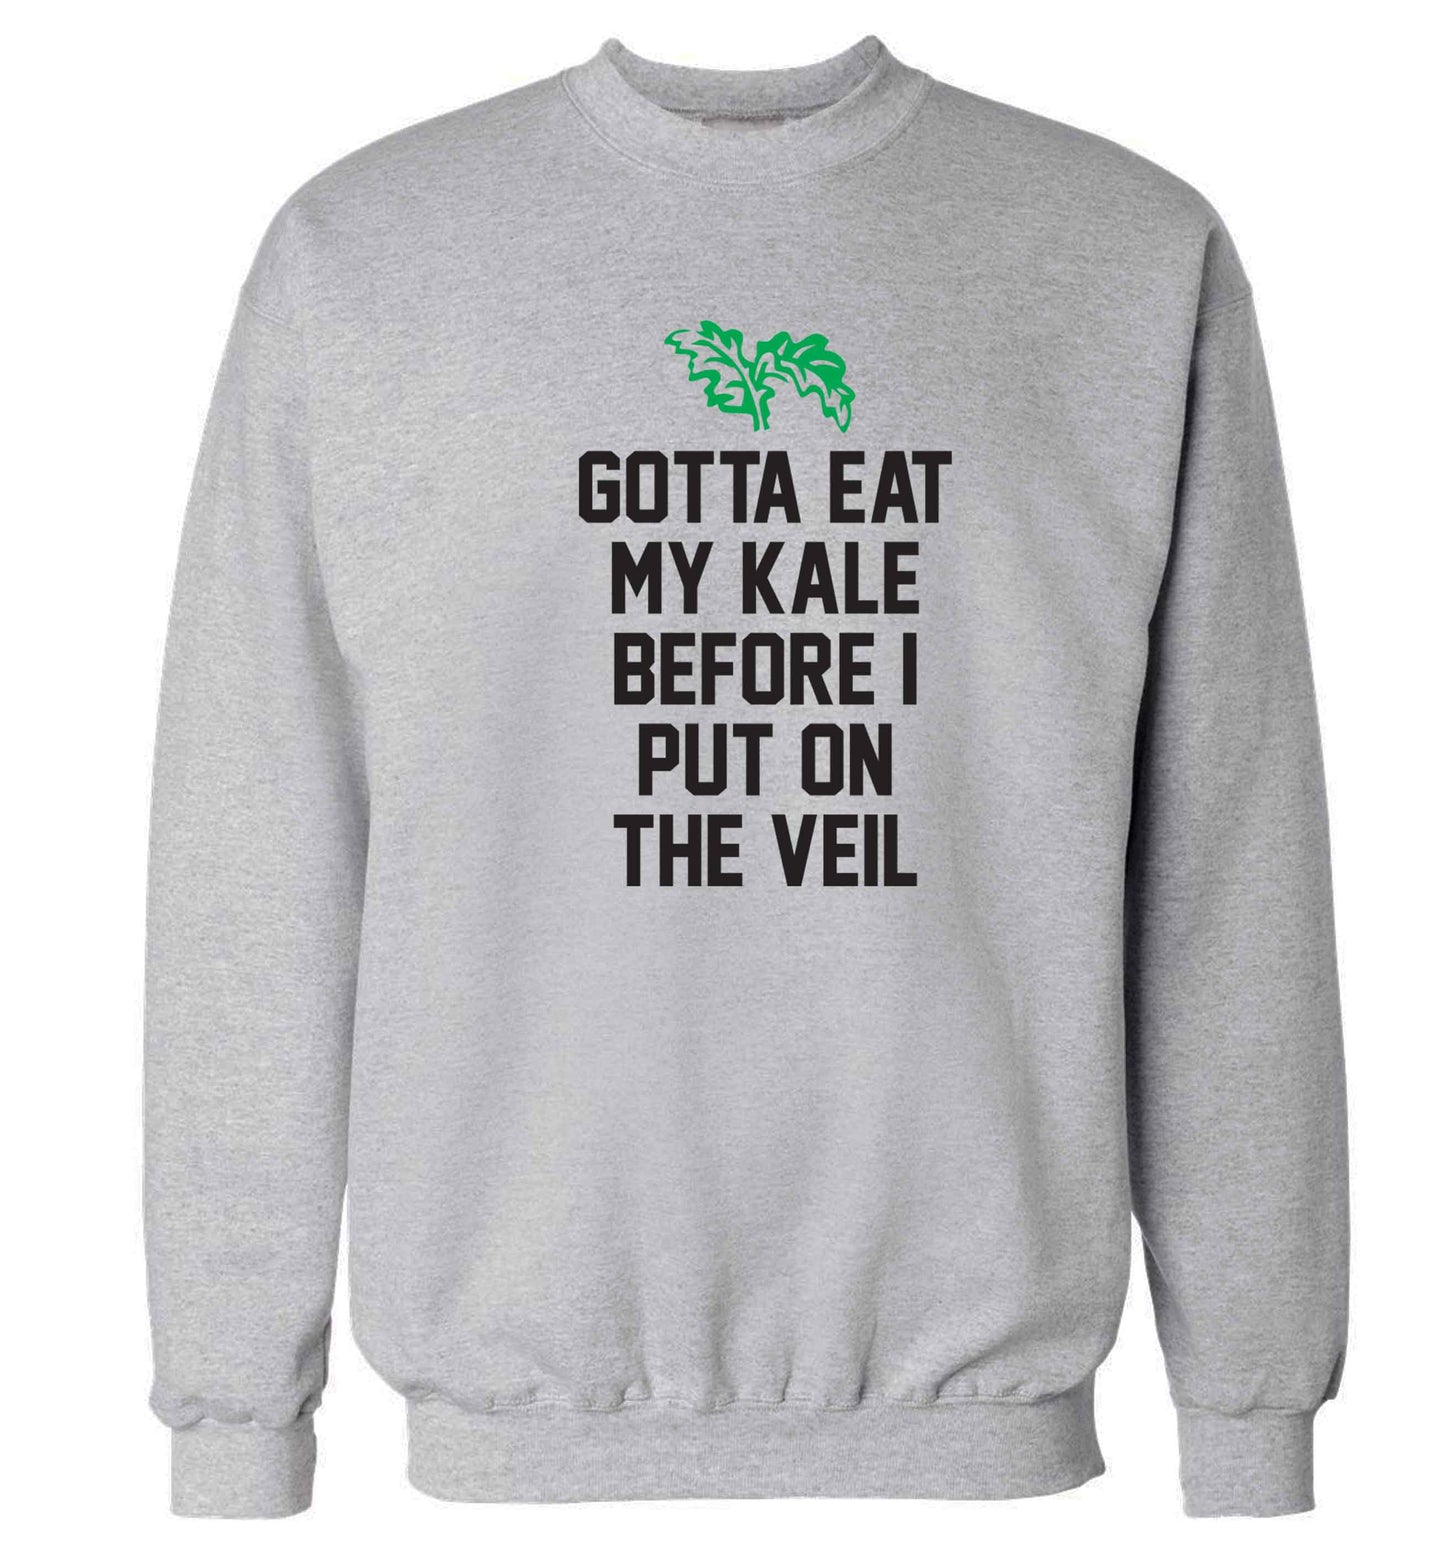 Gotta eat my kale before I put on the veil Adult's unisex grey Sweater 2XL